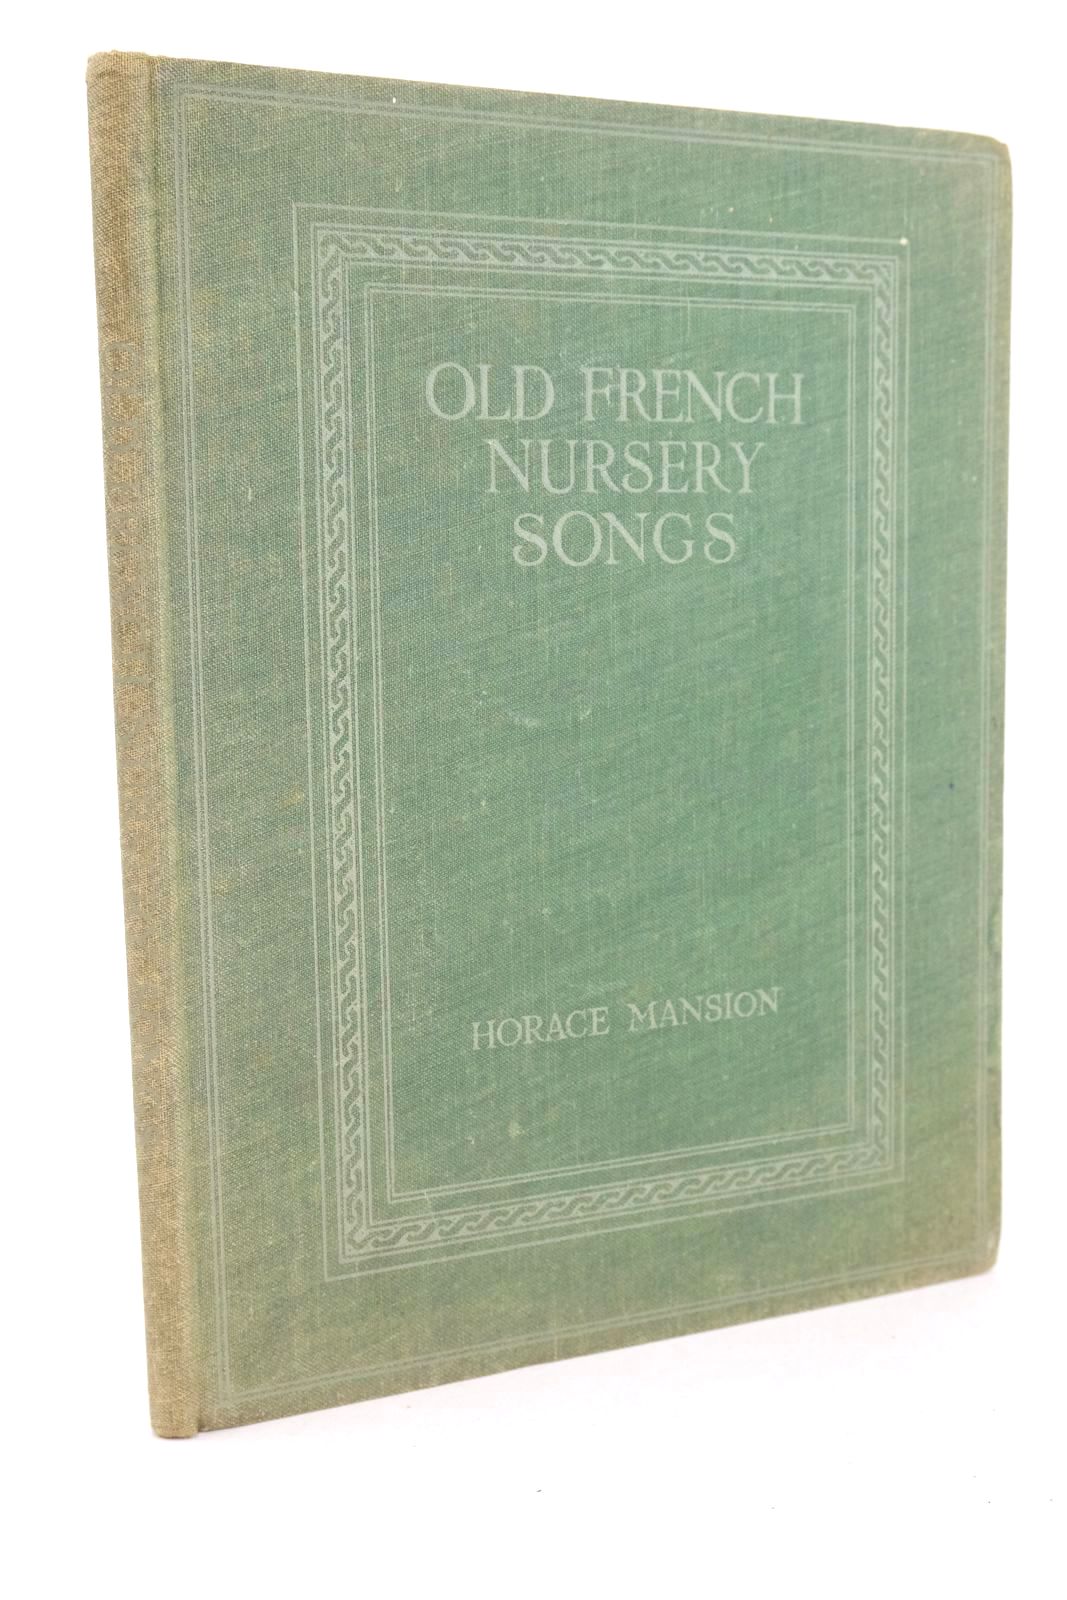 Photo of OLD FRENCH NURSERY SONGS- Stock Number: 1325640